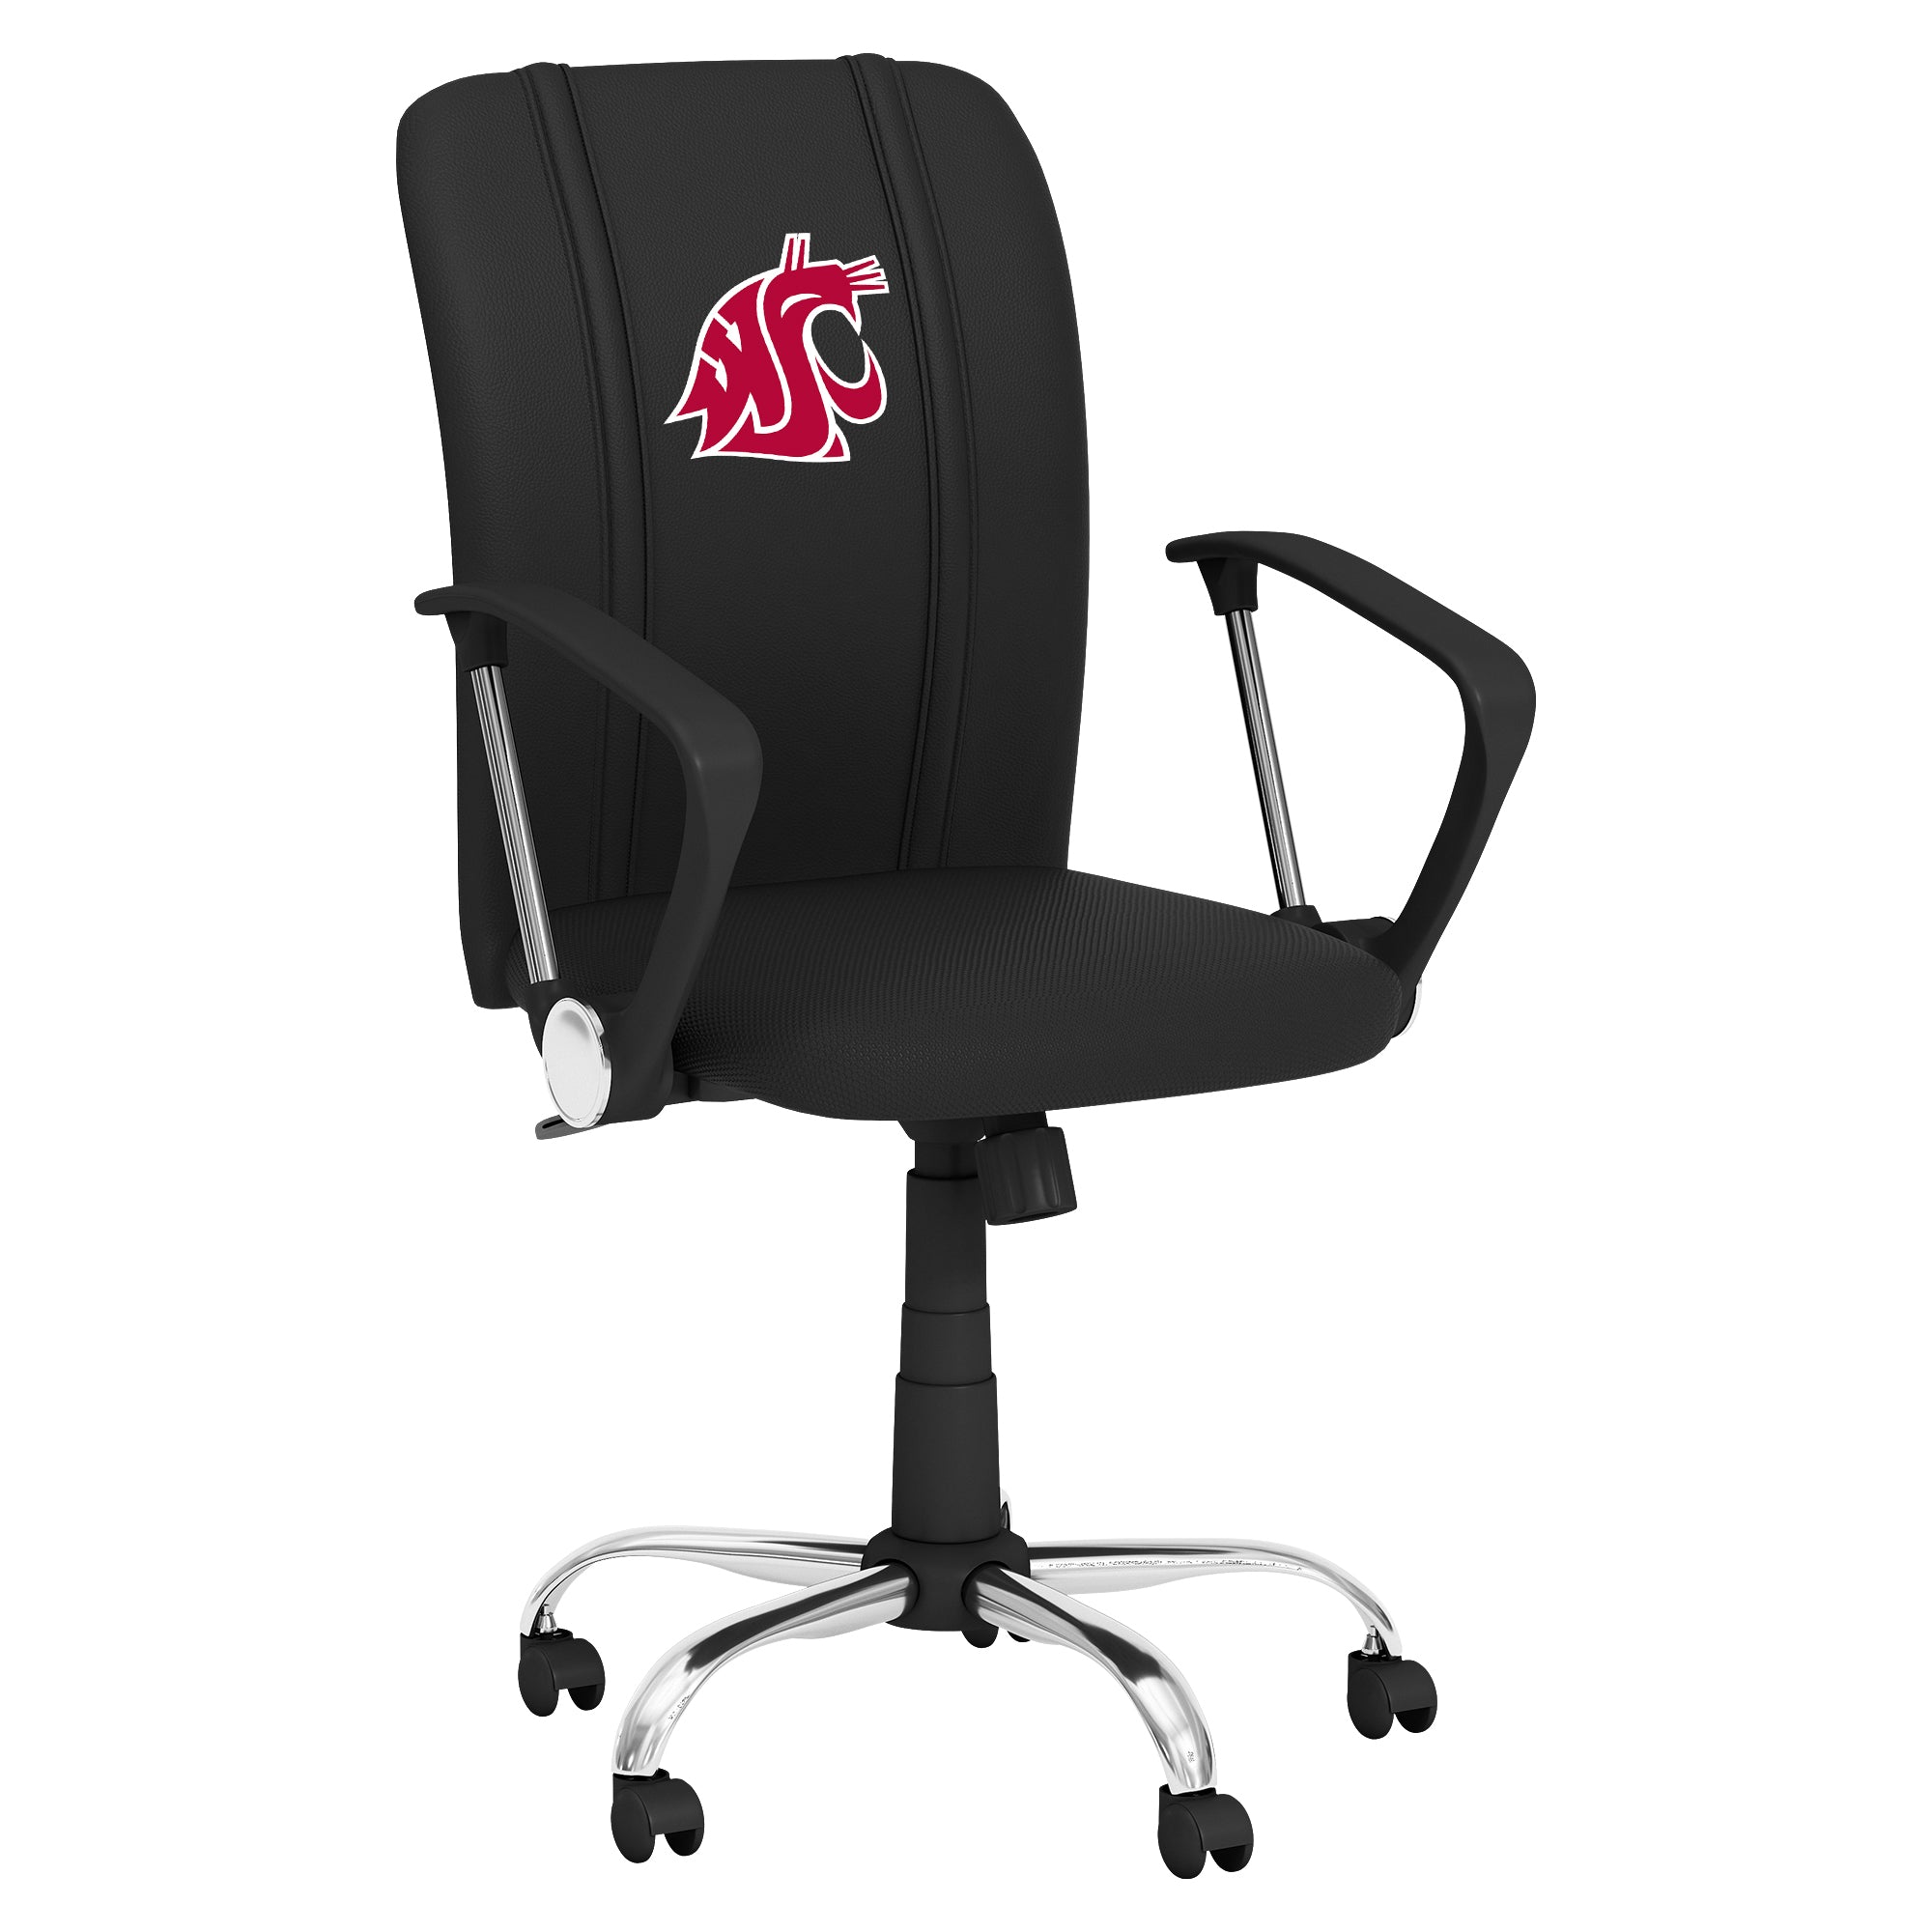 Washington State Cougars Curve Task Chair with Washington State Cougars Logo